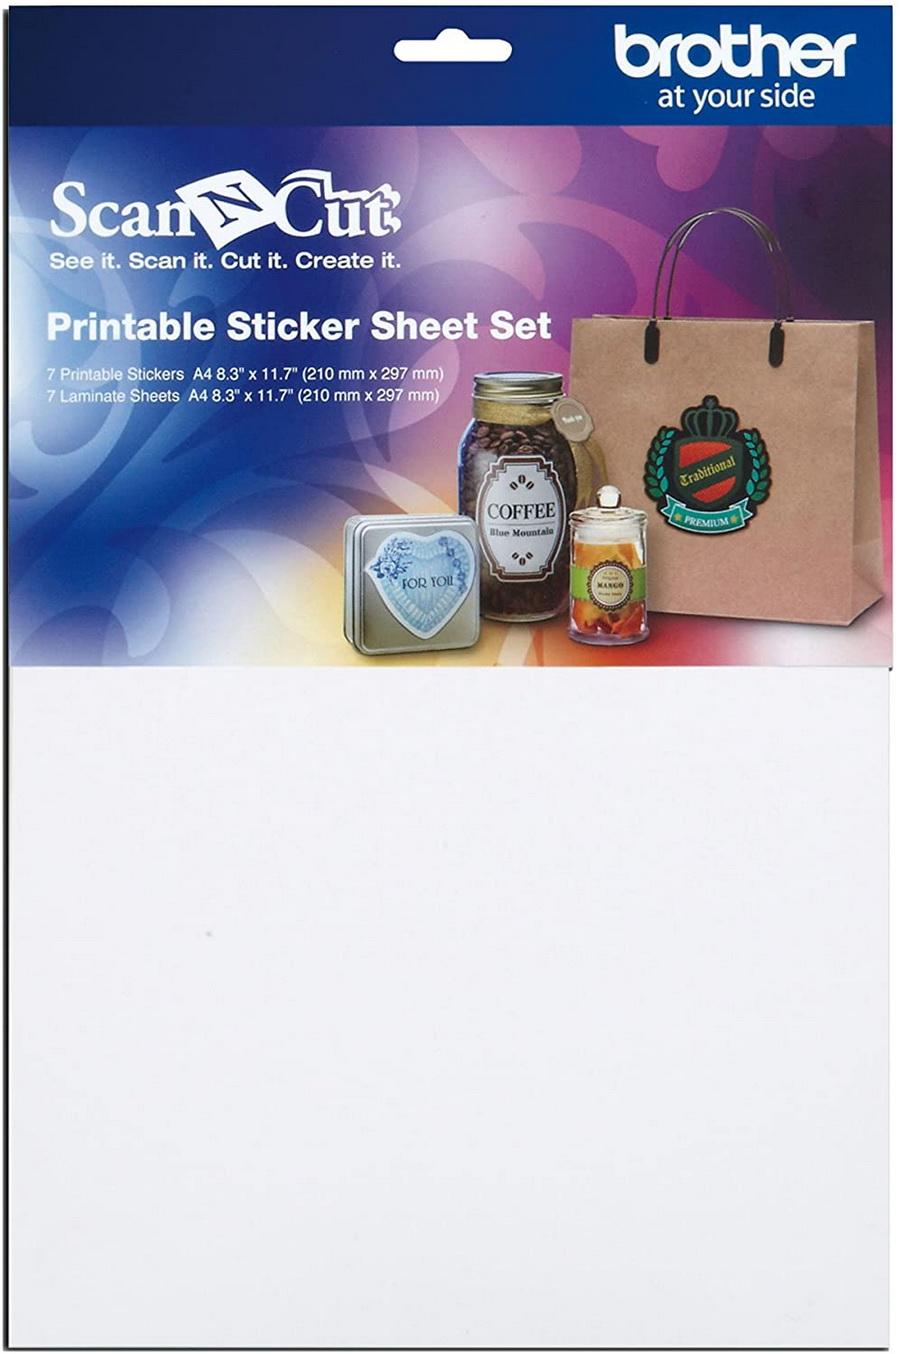 Brother Printable Sticker Sheet Set - Includes 7 Printable Sticker Sheets and 7 Laminate Sheets (8.3in x 11.7in)